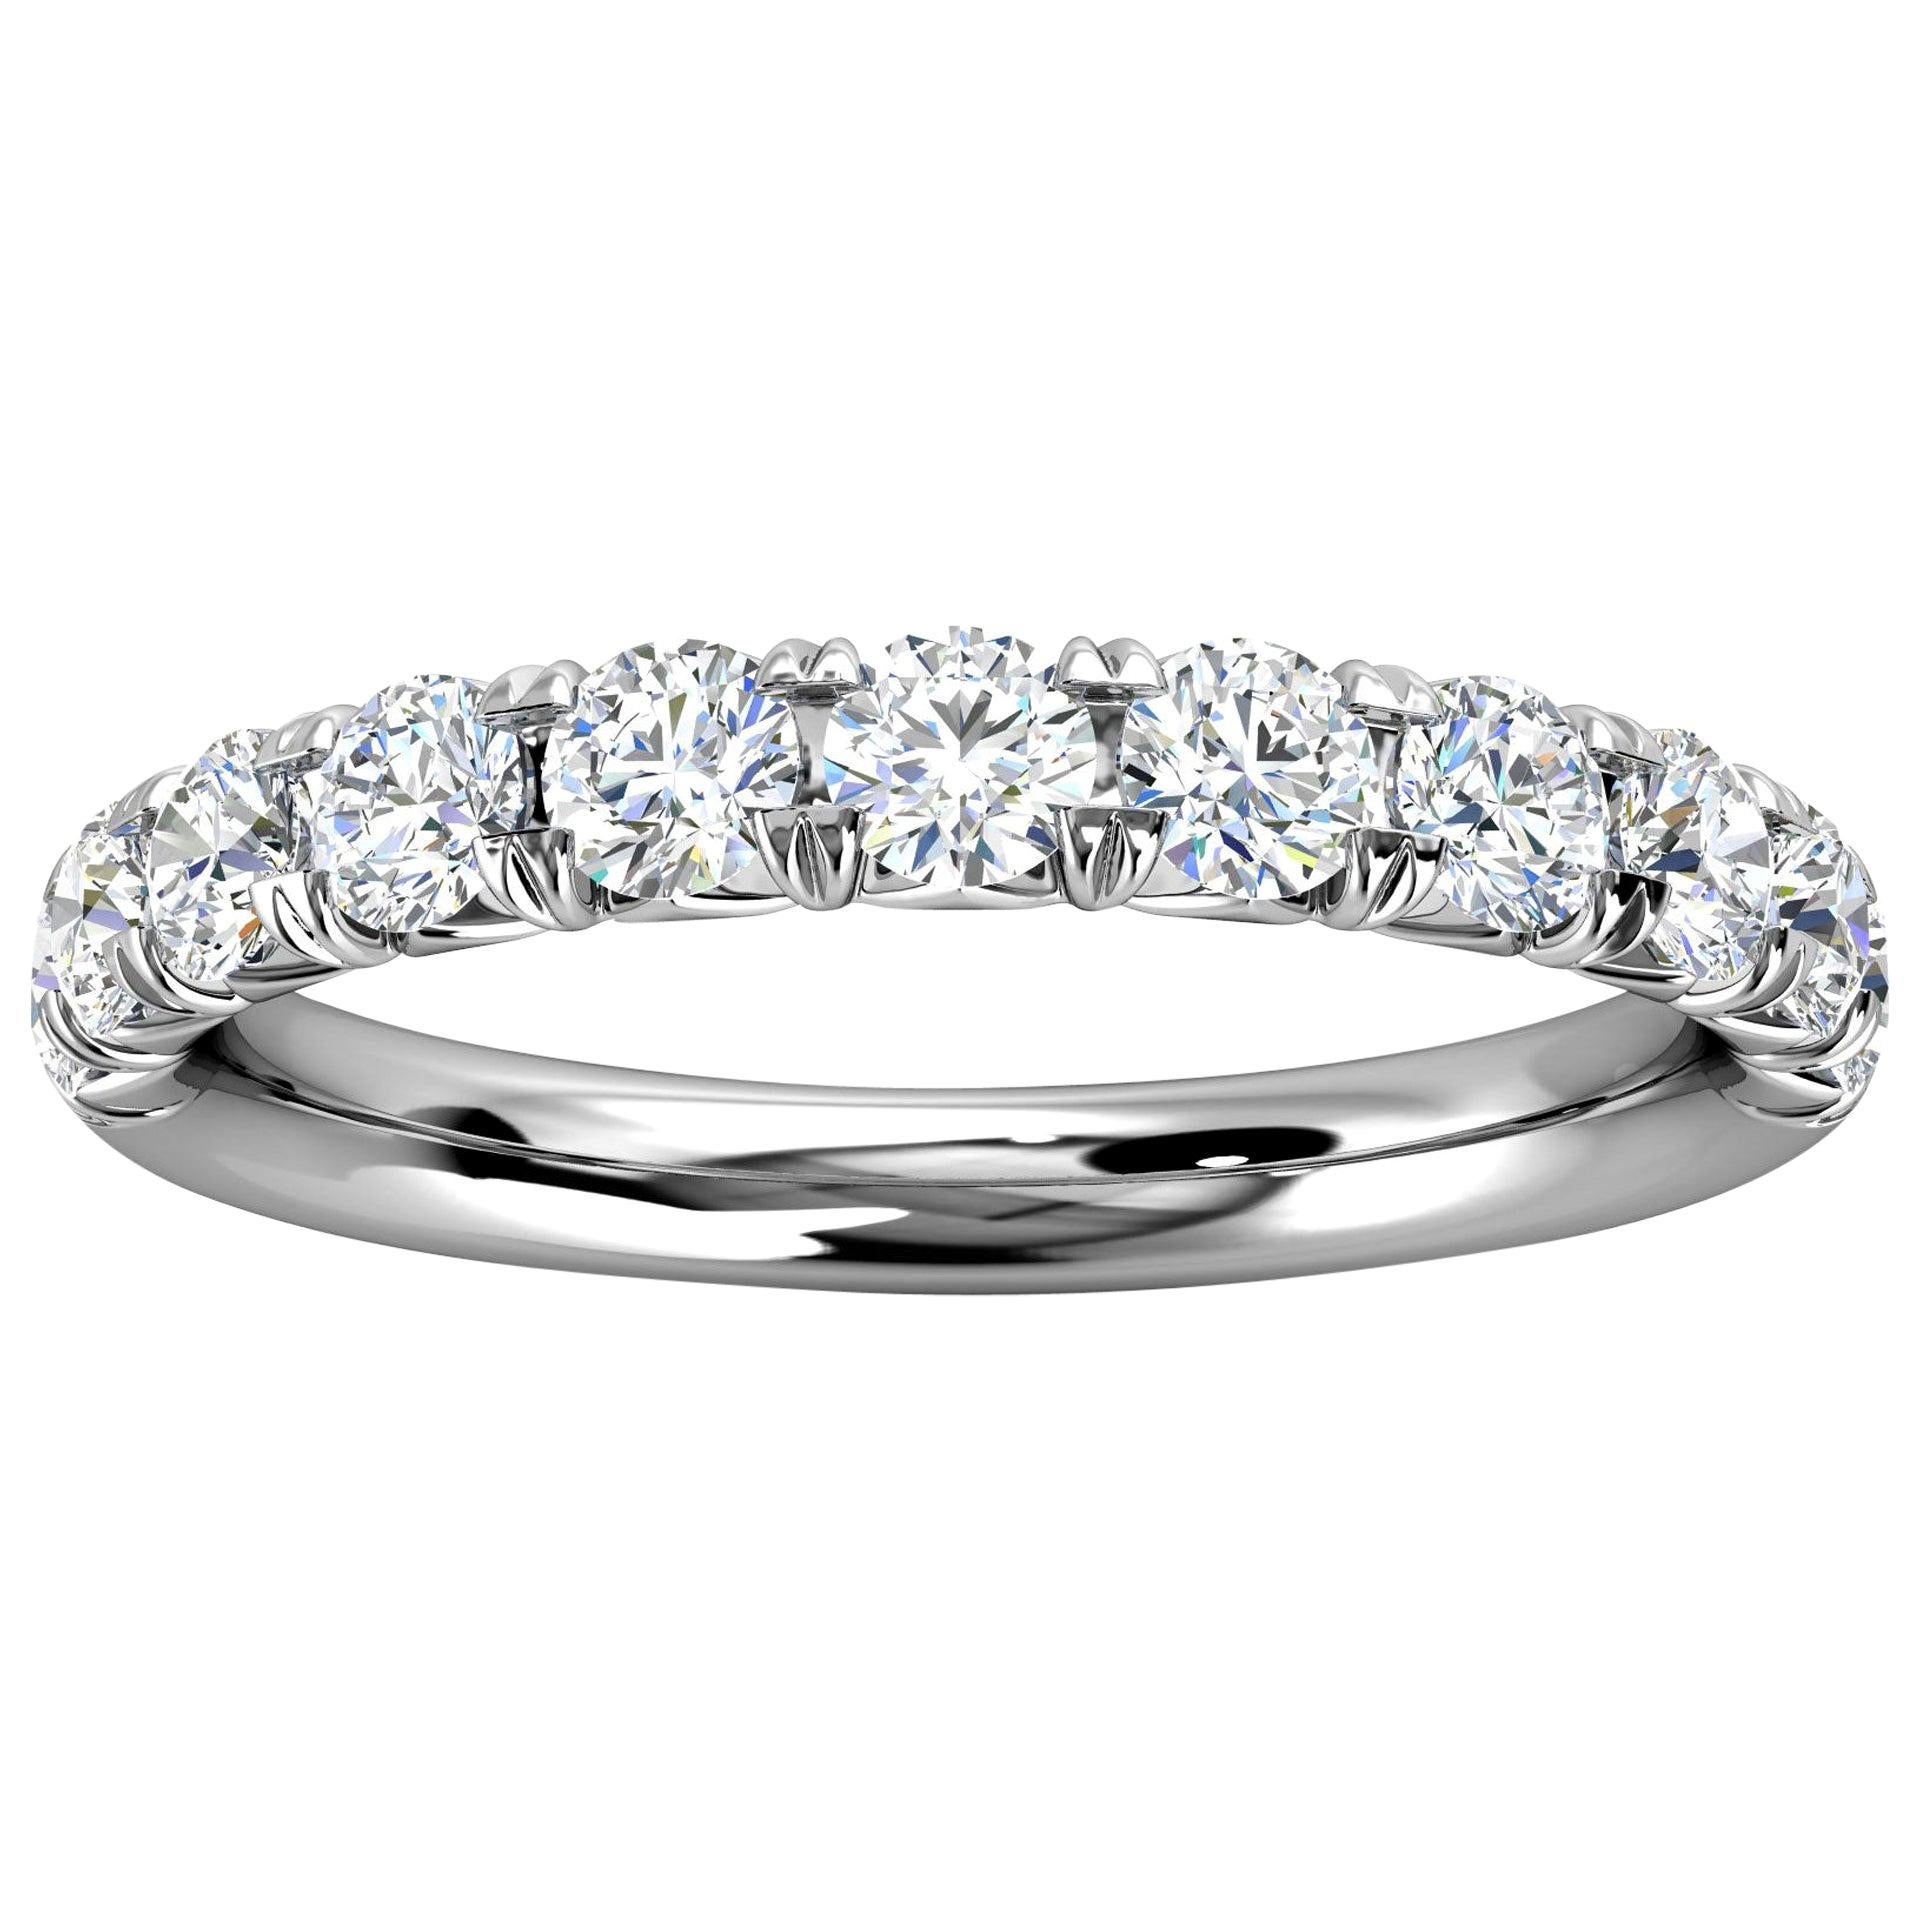 For Sale:  14k White Gold Voyage French Pave Diamond Ring '3/4 Ct. Tw'